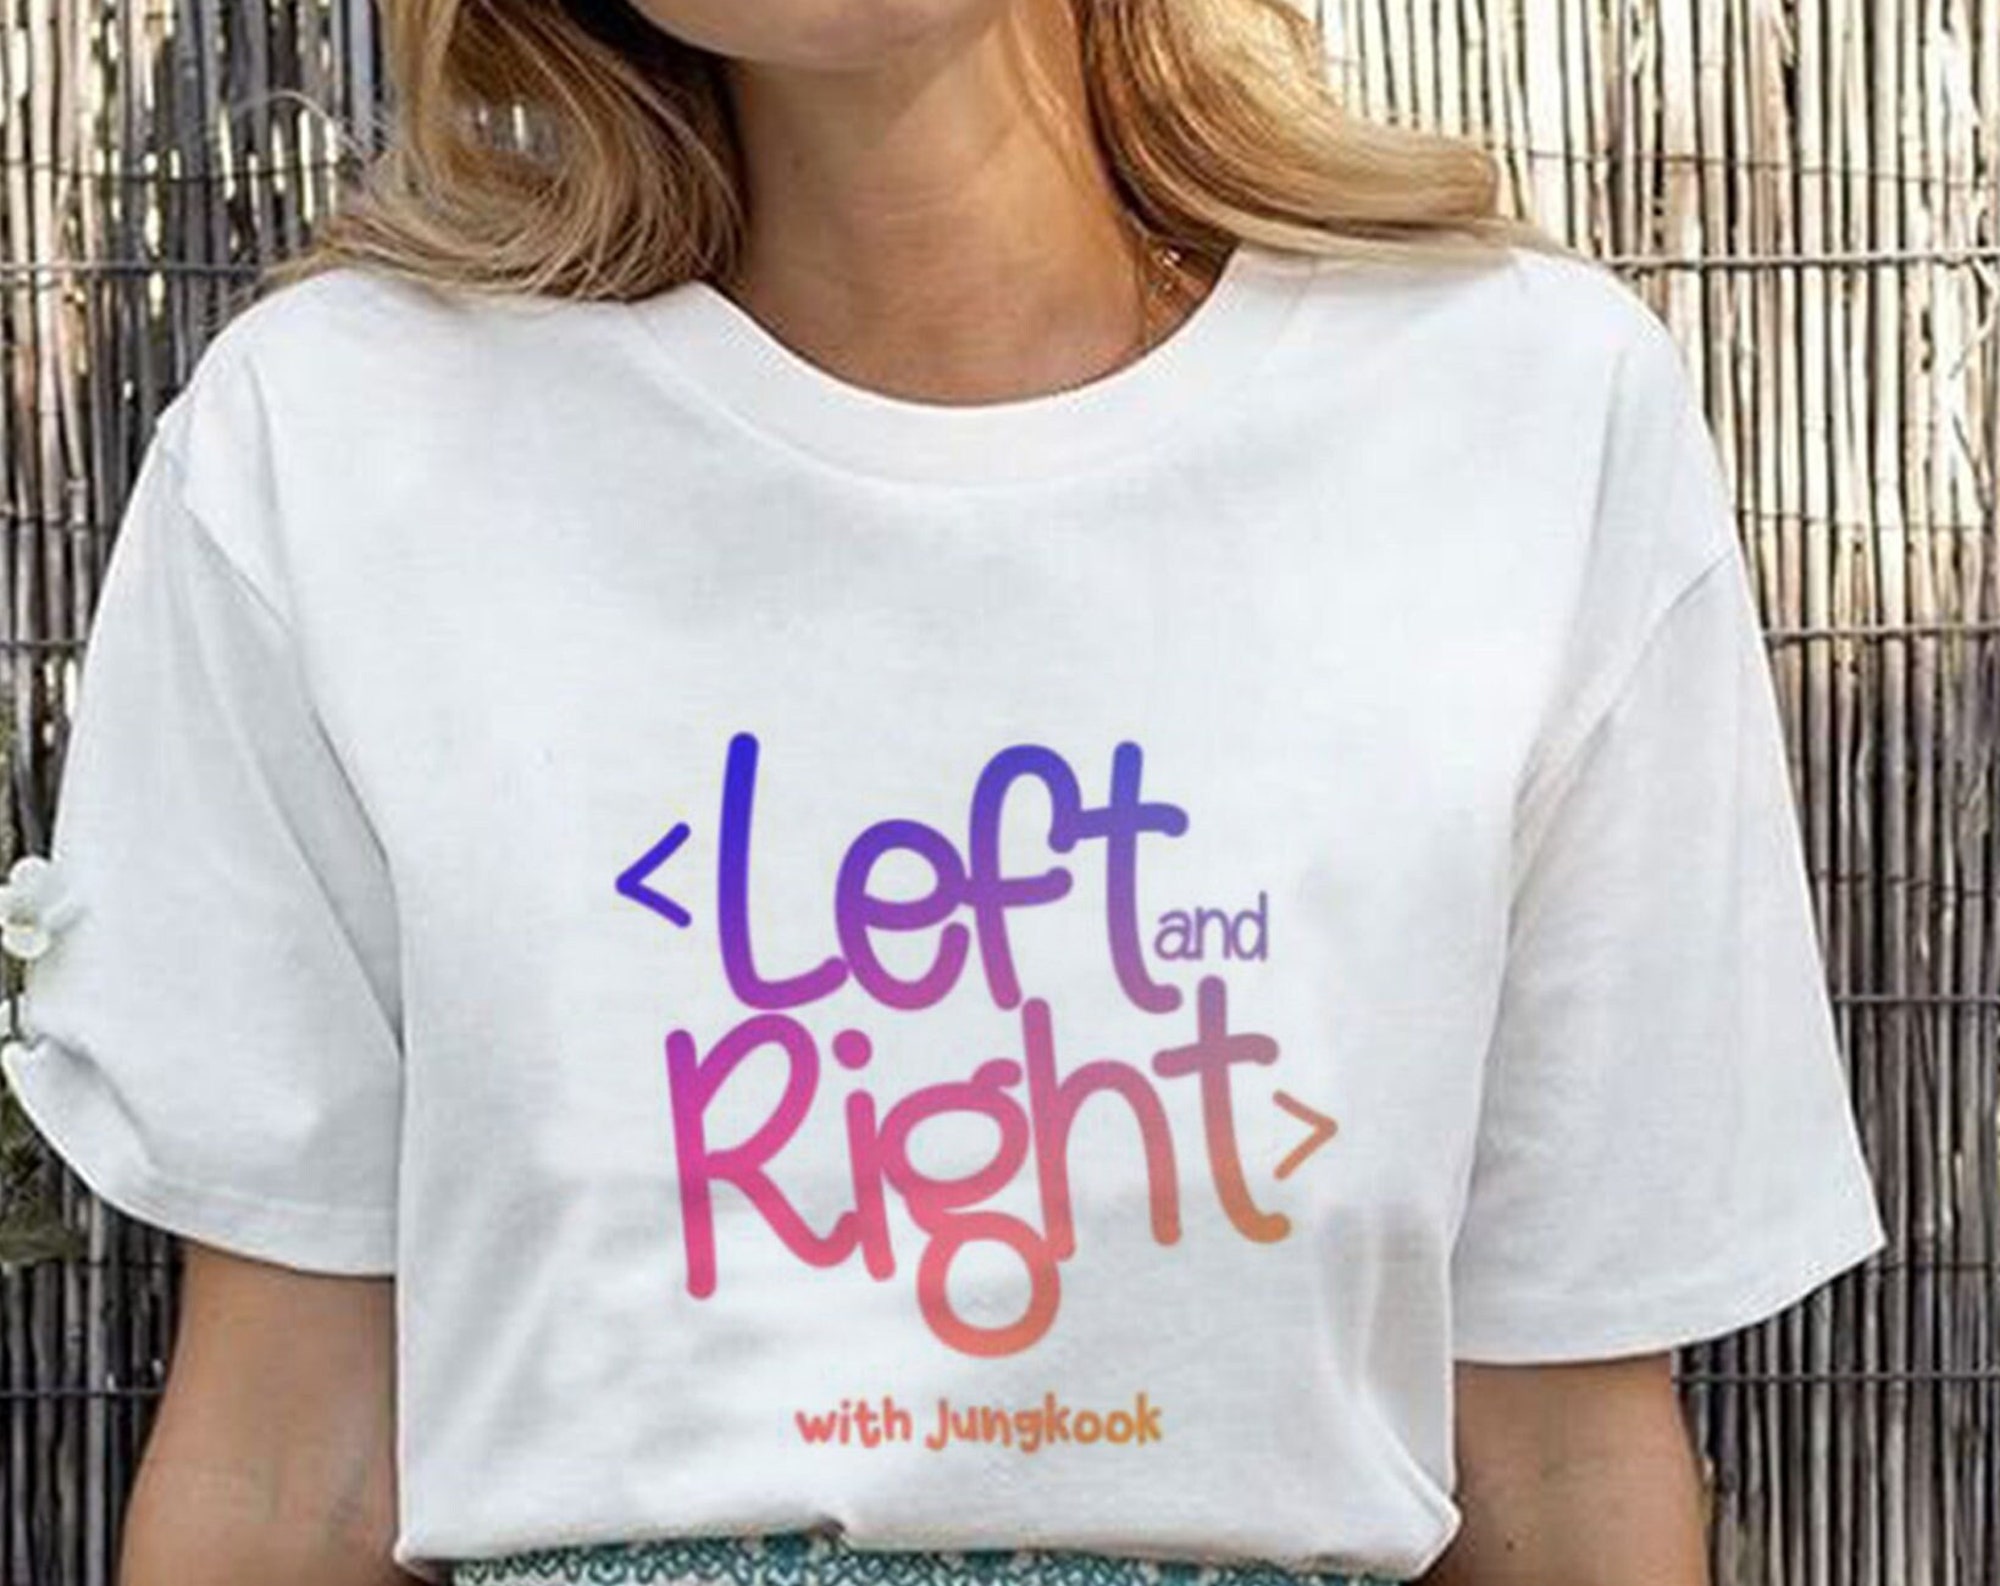 Discover Left and Right with Jungkook Tshirt, Charlie Puth left and right Song Tshirt